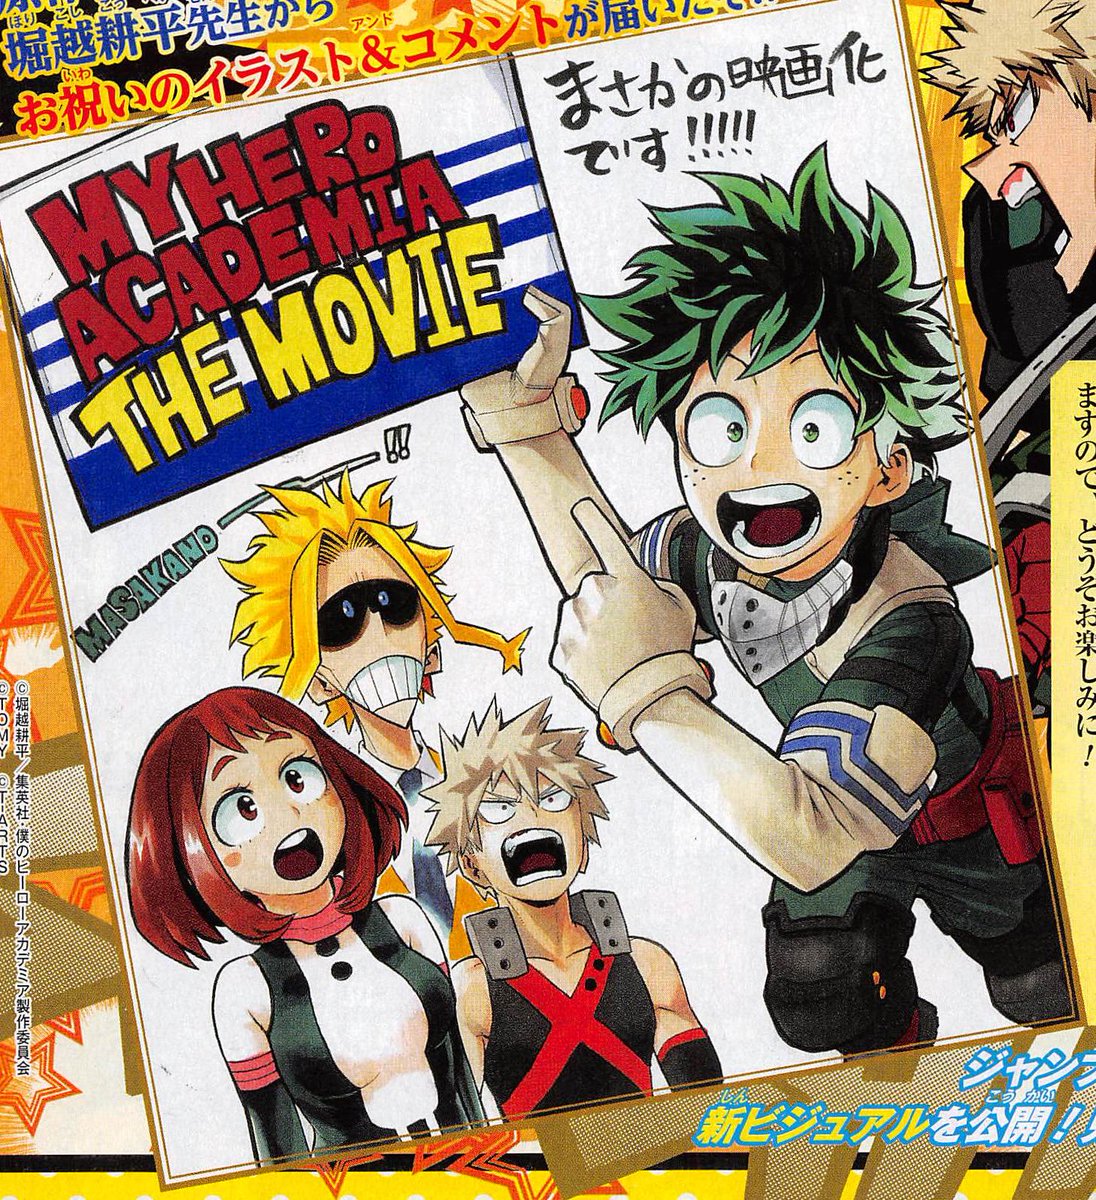 The Issues With My Hero Academia's Movies